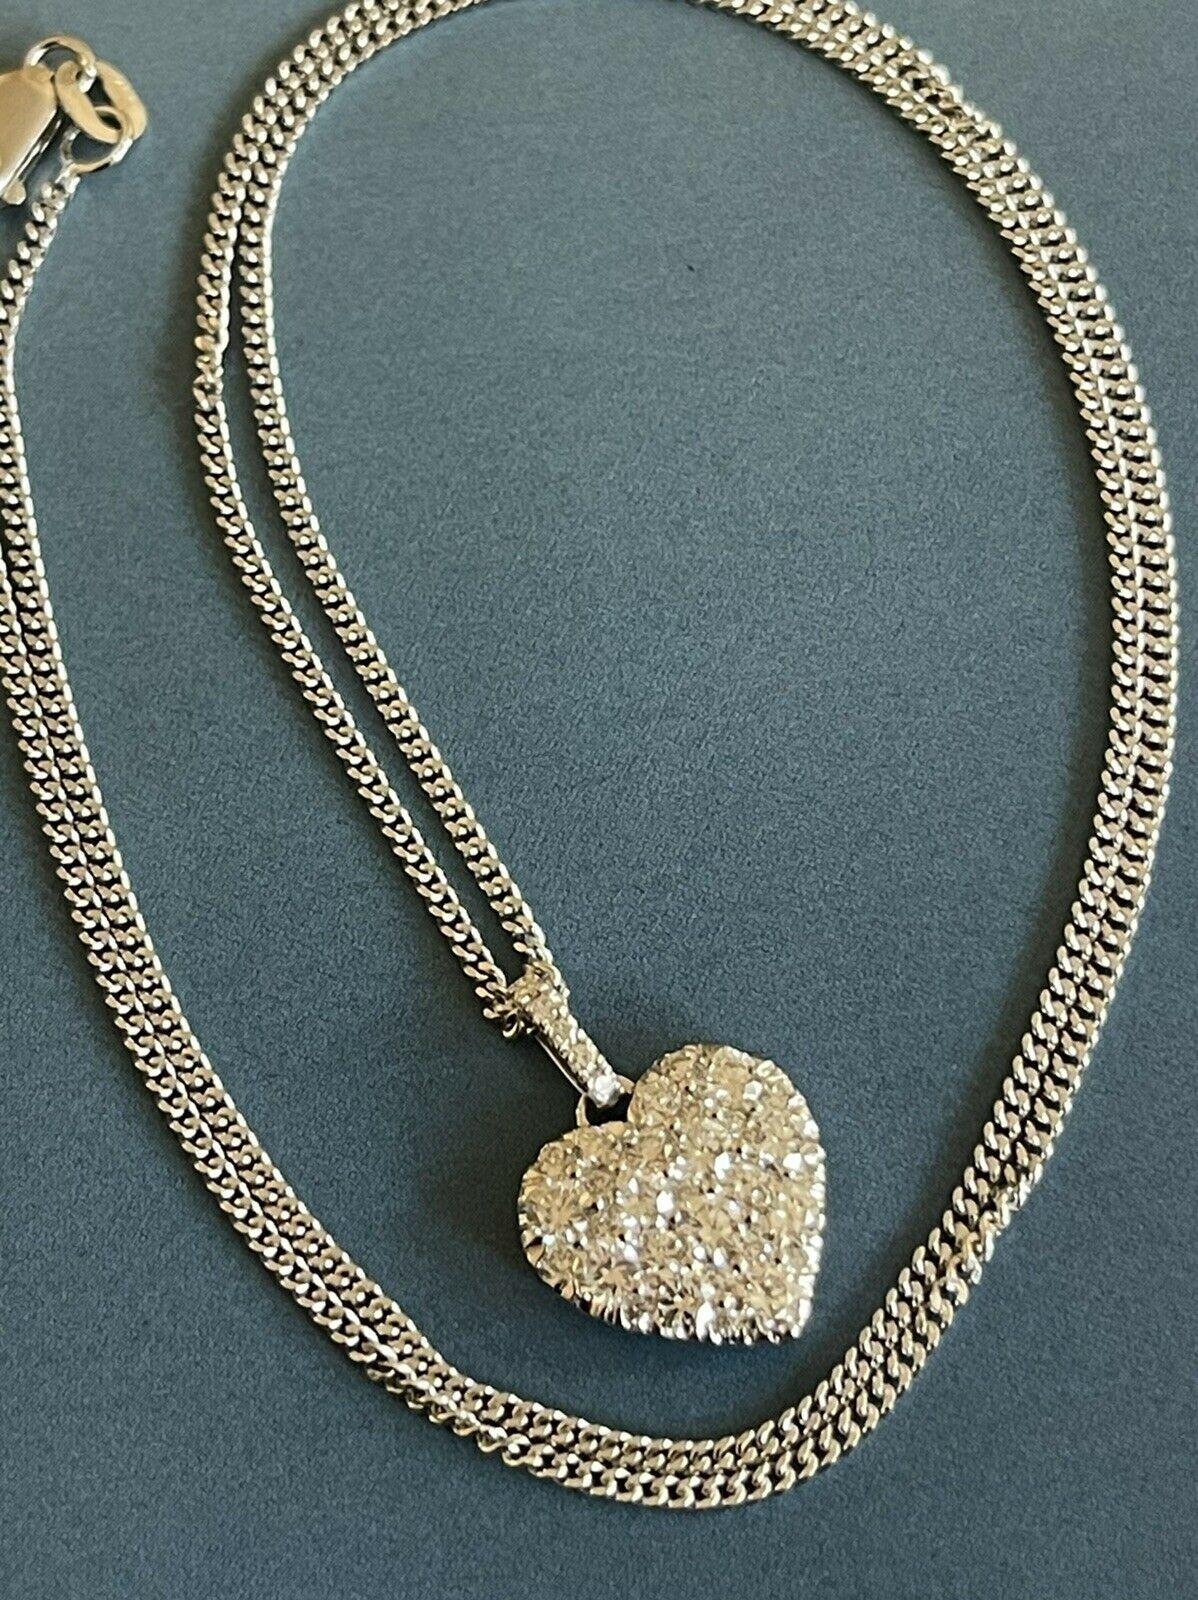 18ct White Gold Diamond Necklace 1ct Heart Pendant 18” Hallmarked VS One Carat For Sale 1